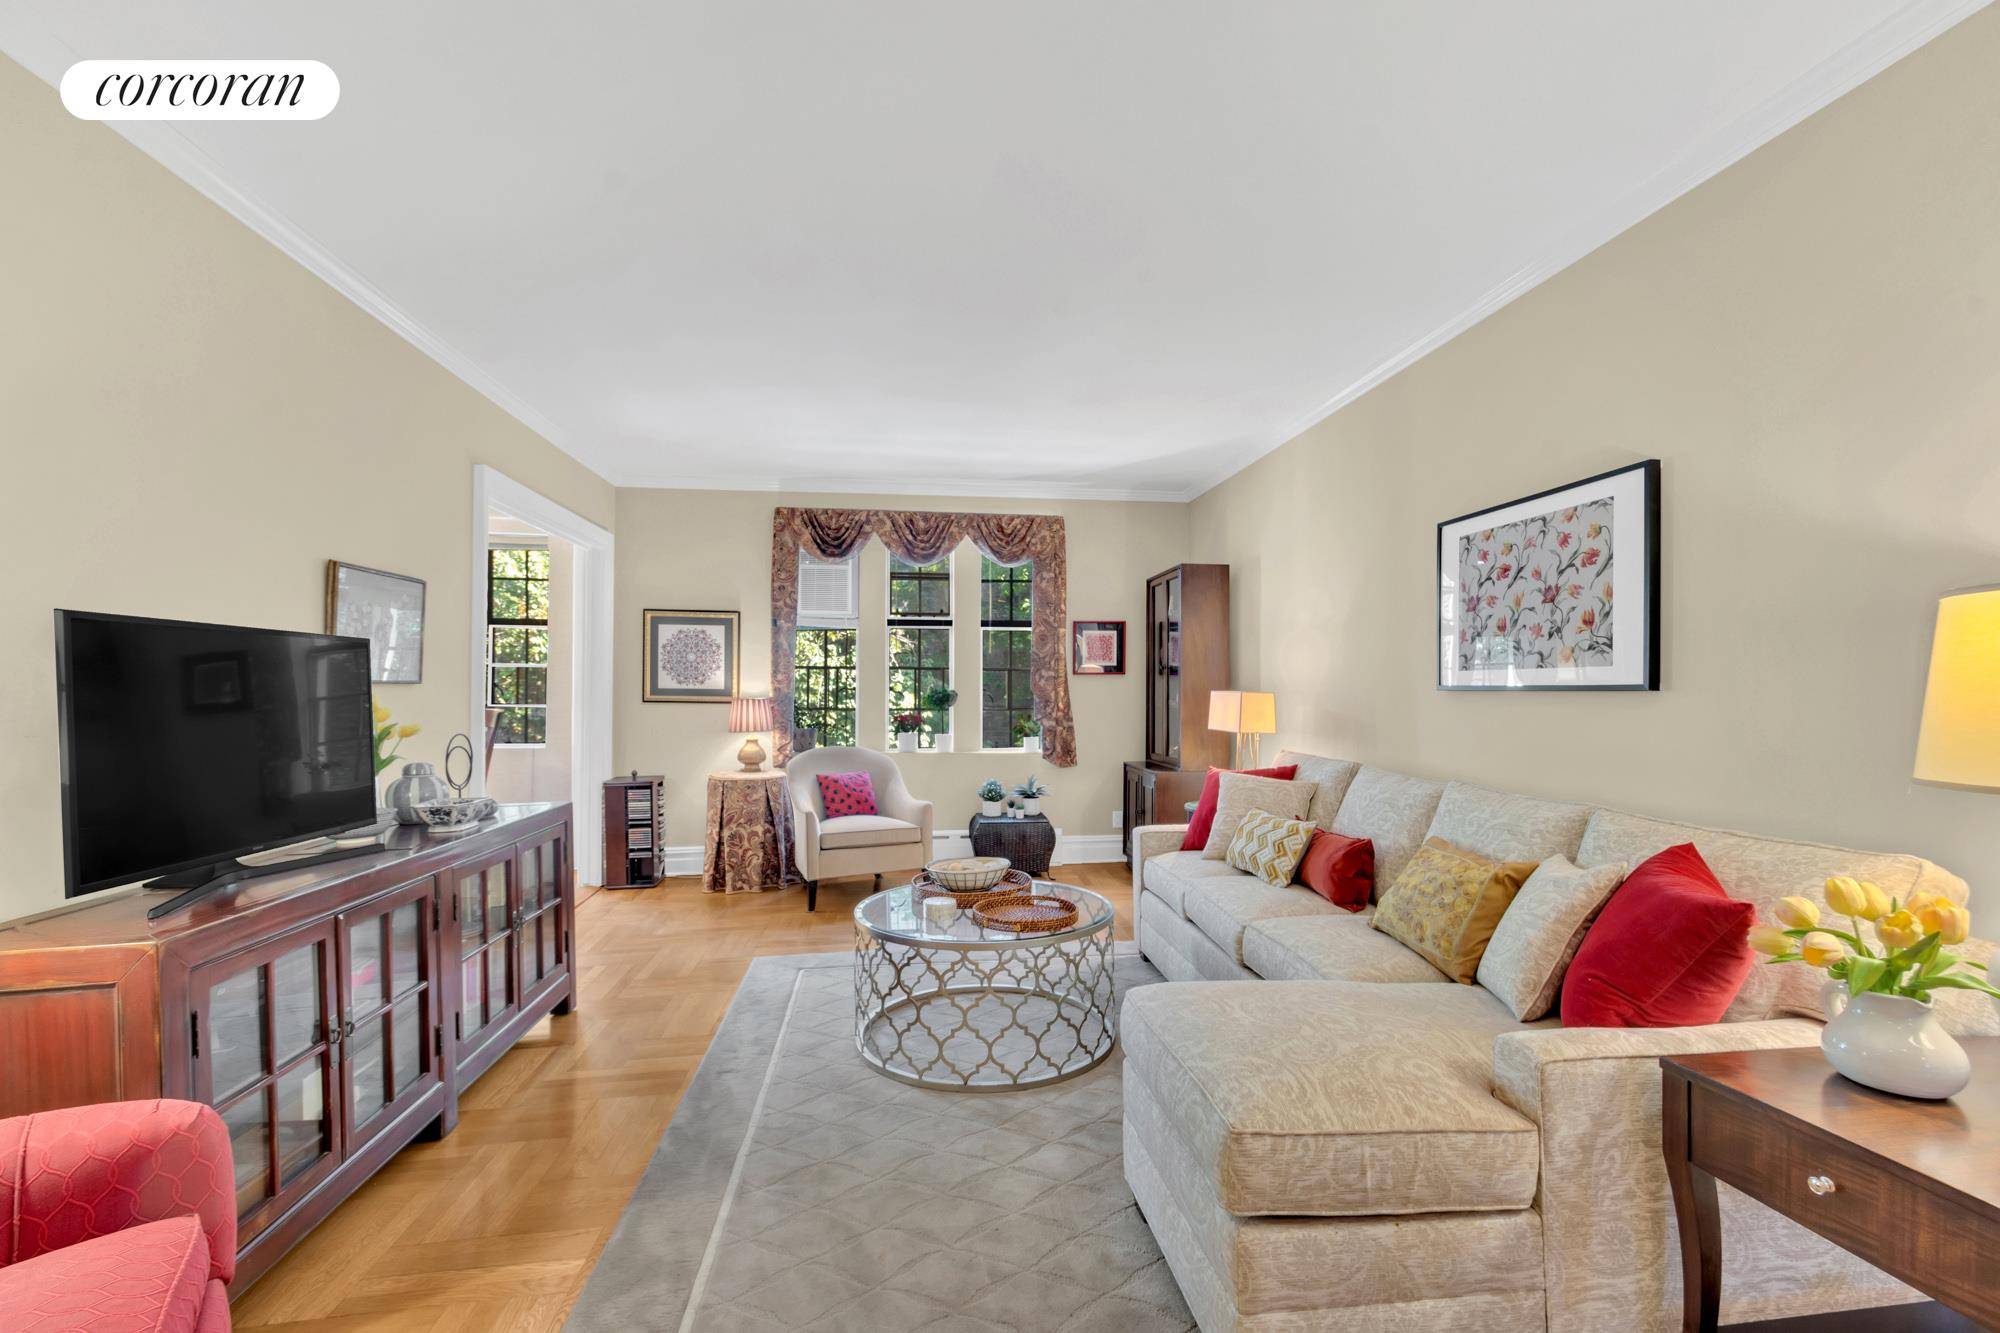 You cannot have better than this graciously proportioned 2 bedroom home with views of the Hudson River, the Palisades, and is surrounded by landscaped gardens and flowering trees.